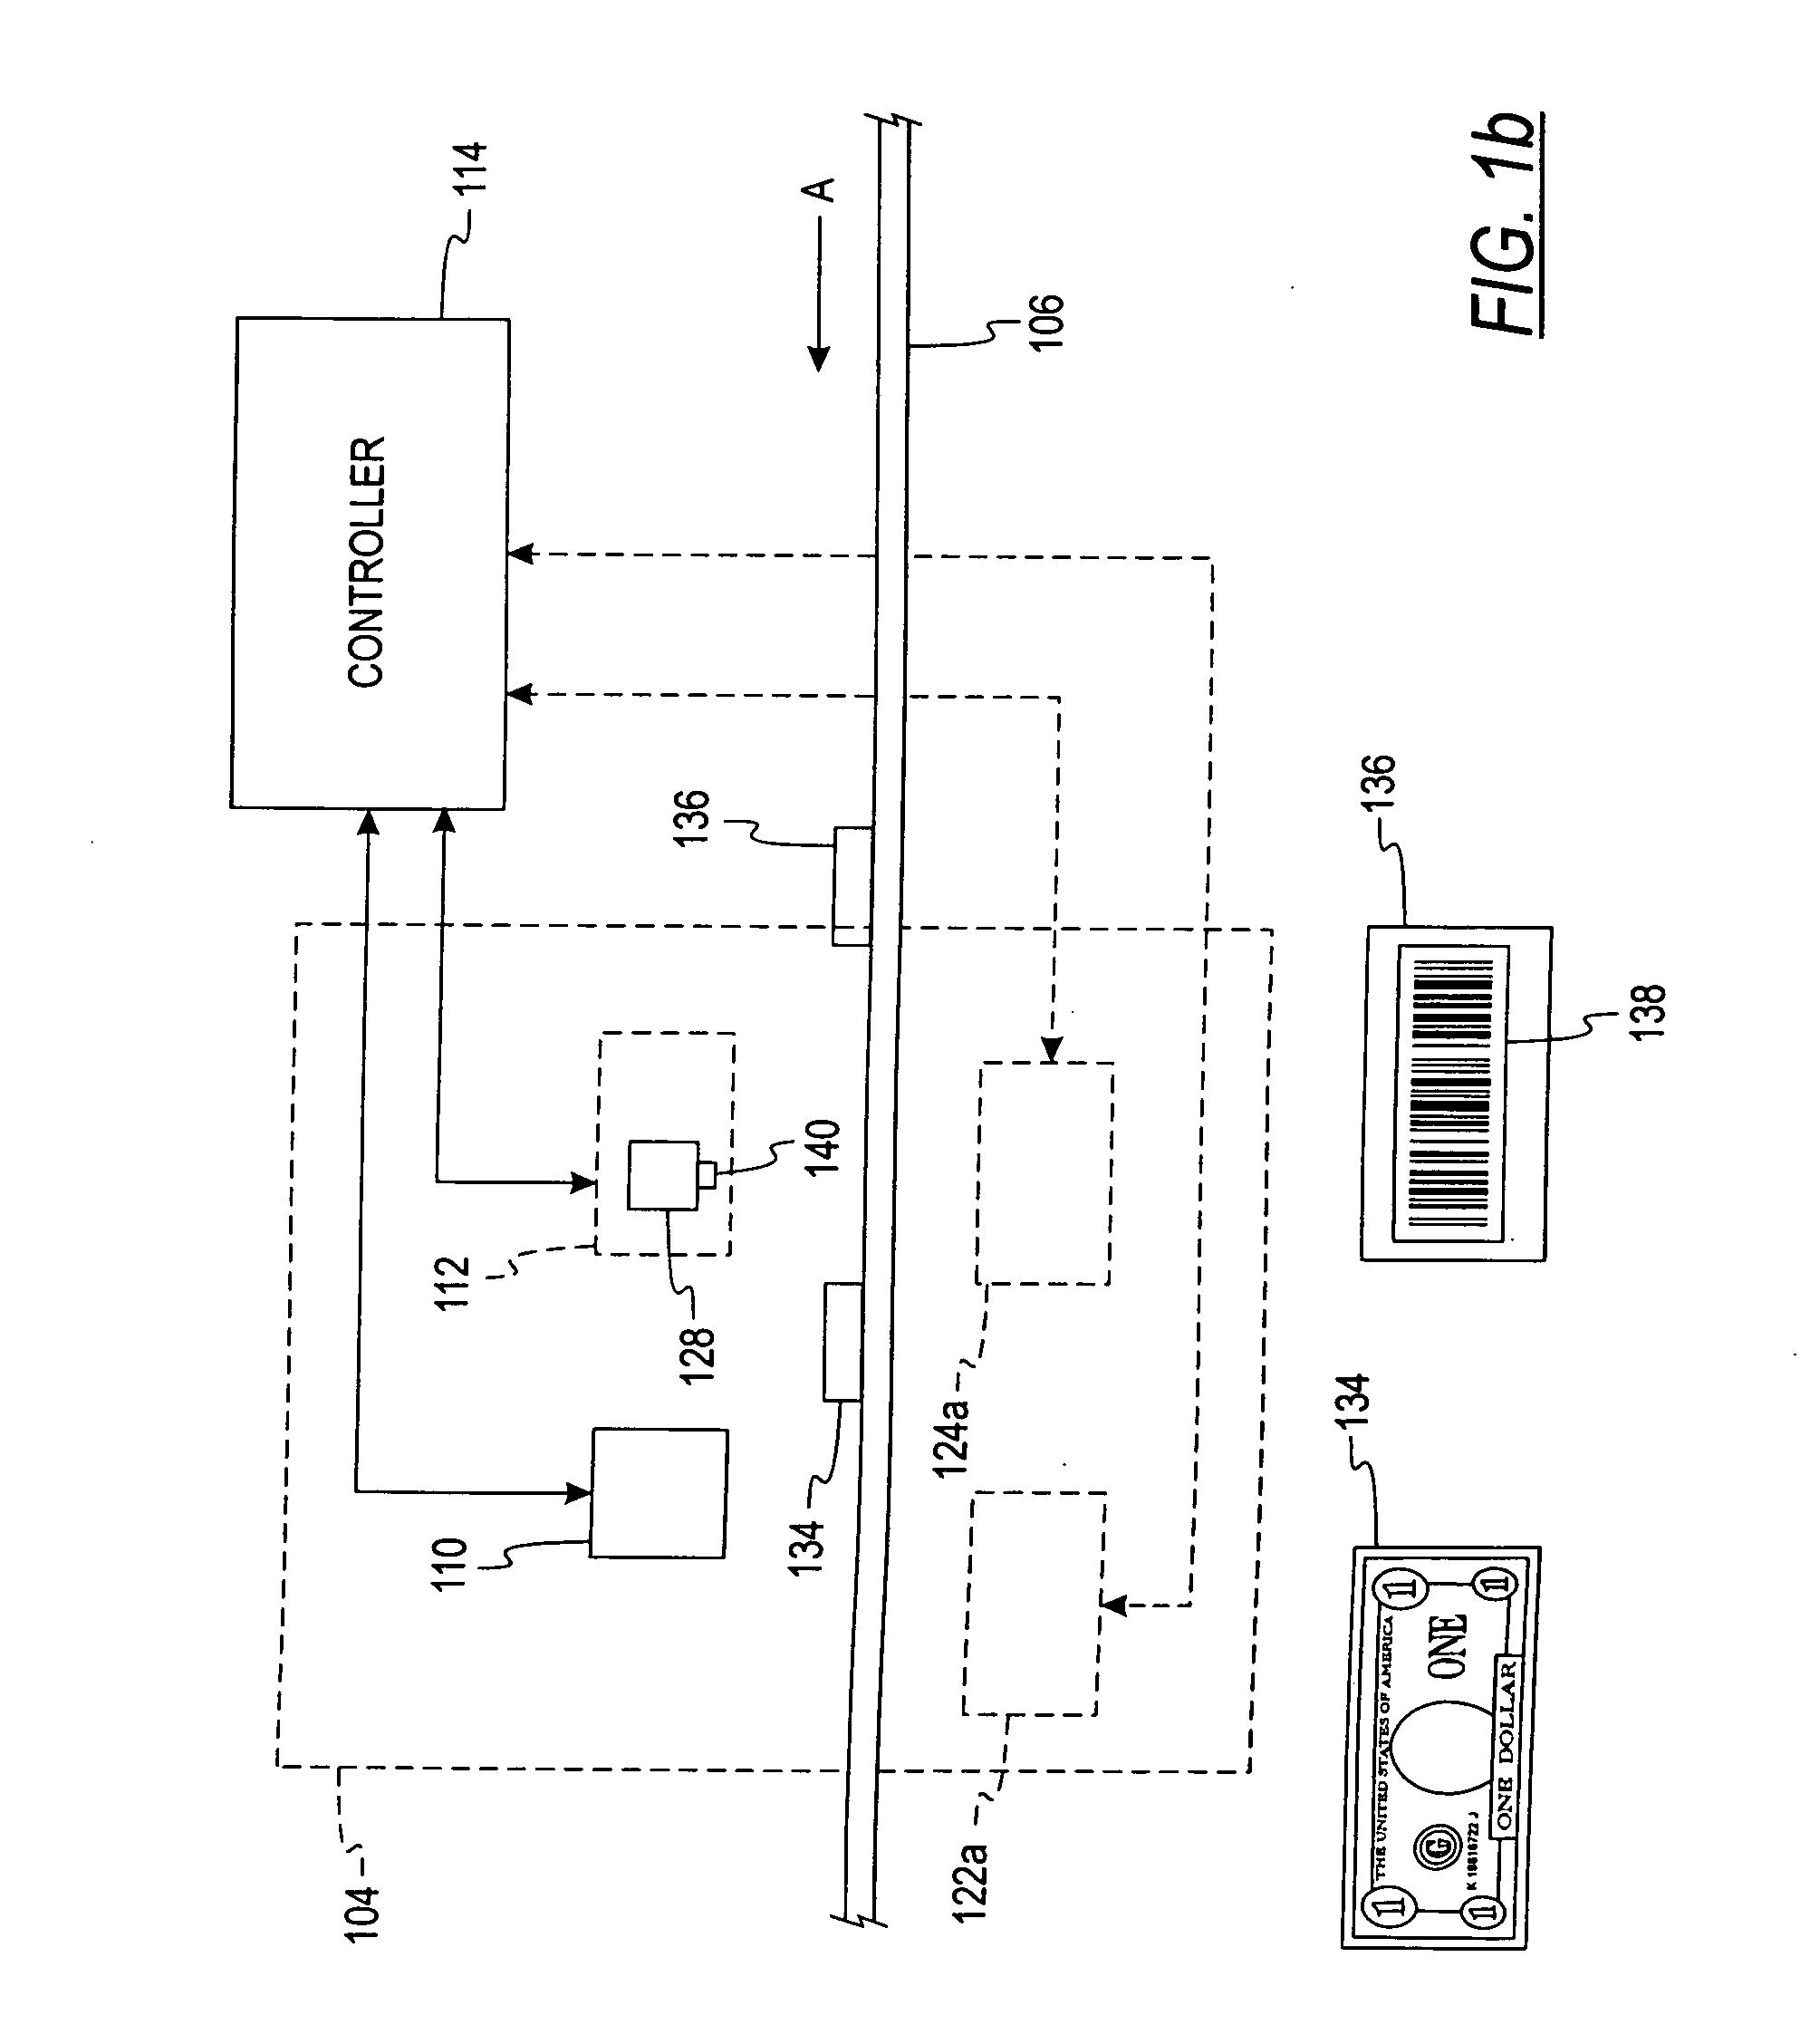 System and method for searching and verifying documents in a document processing device